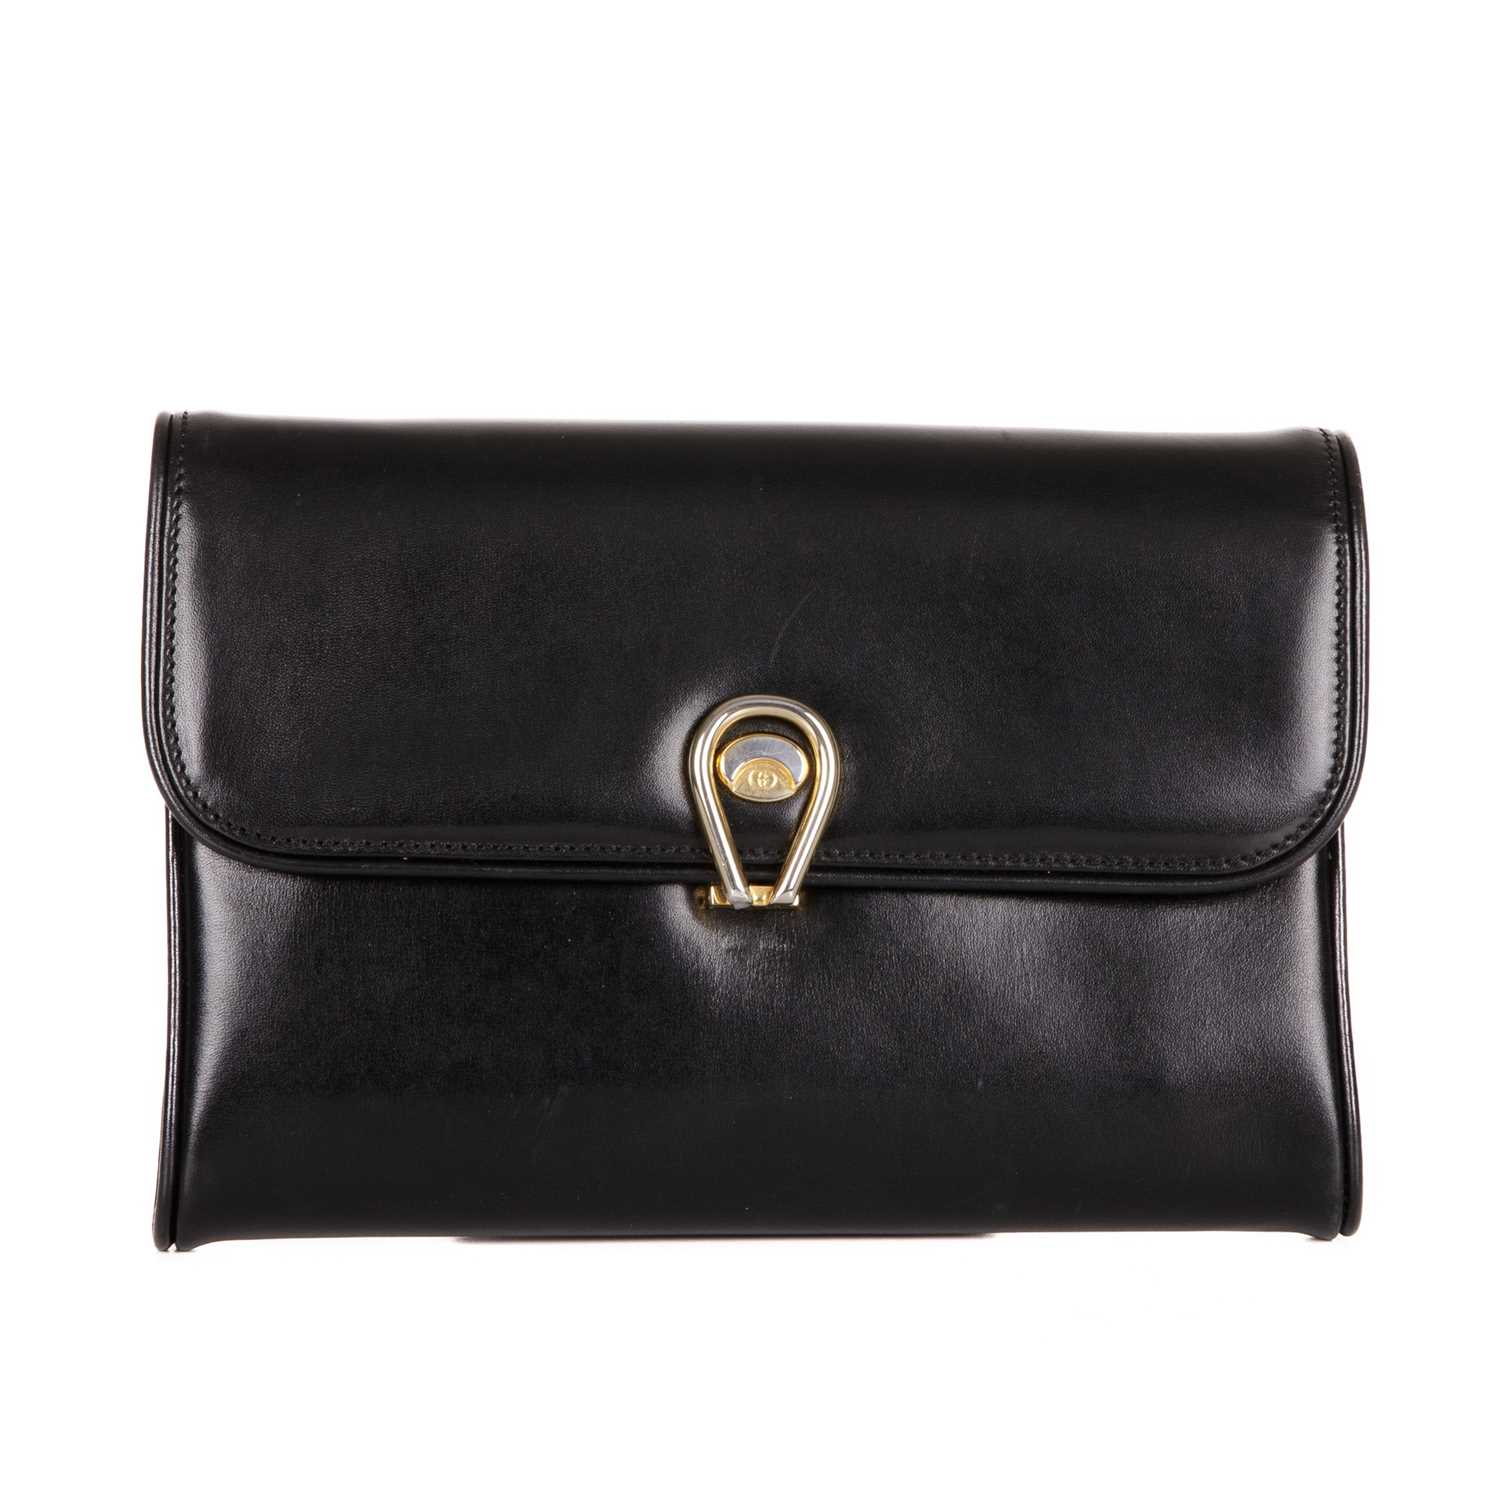 Gucci, a vintage black leather handbag, crafted from smooth black leather, featuring an adjustable